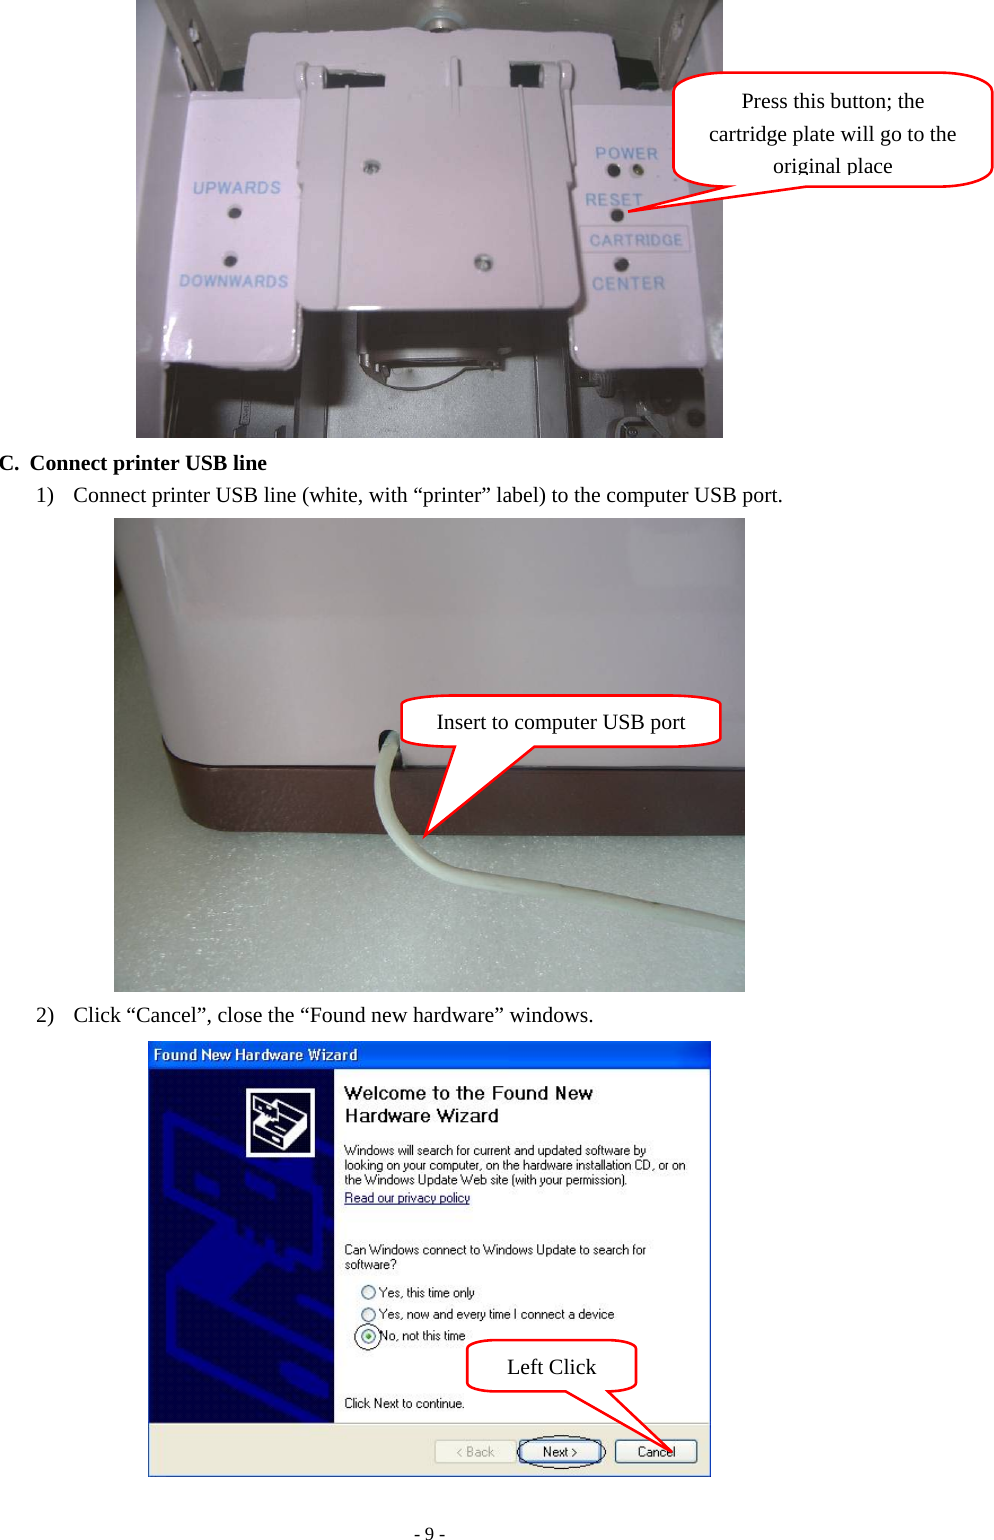 - 9 -  C. Connect printer USB line 1) Connect printer USB line (white, with “printer” label) to the computer USB port.    2) Click “Cancel”, close the “Found new hardware” windows.     Press this button; the cartridge plate will go to the original placeLeft Click Insert to computer USB port 